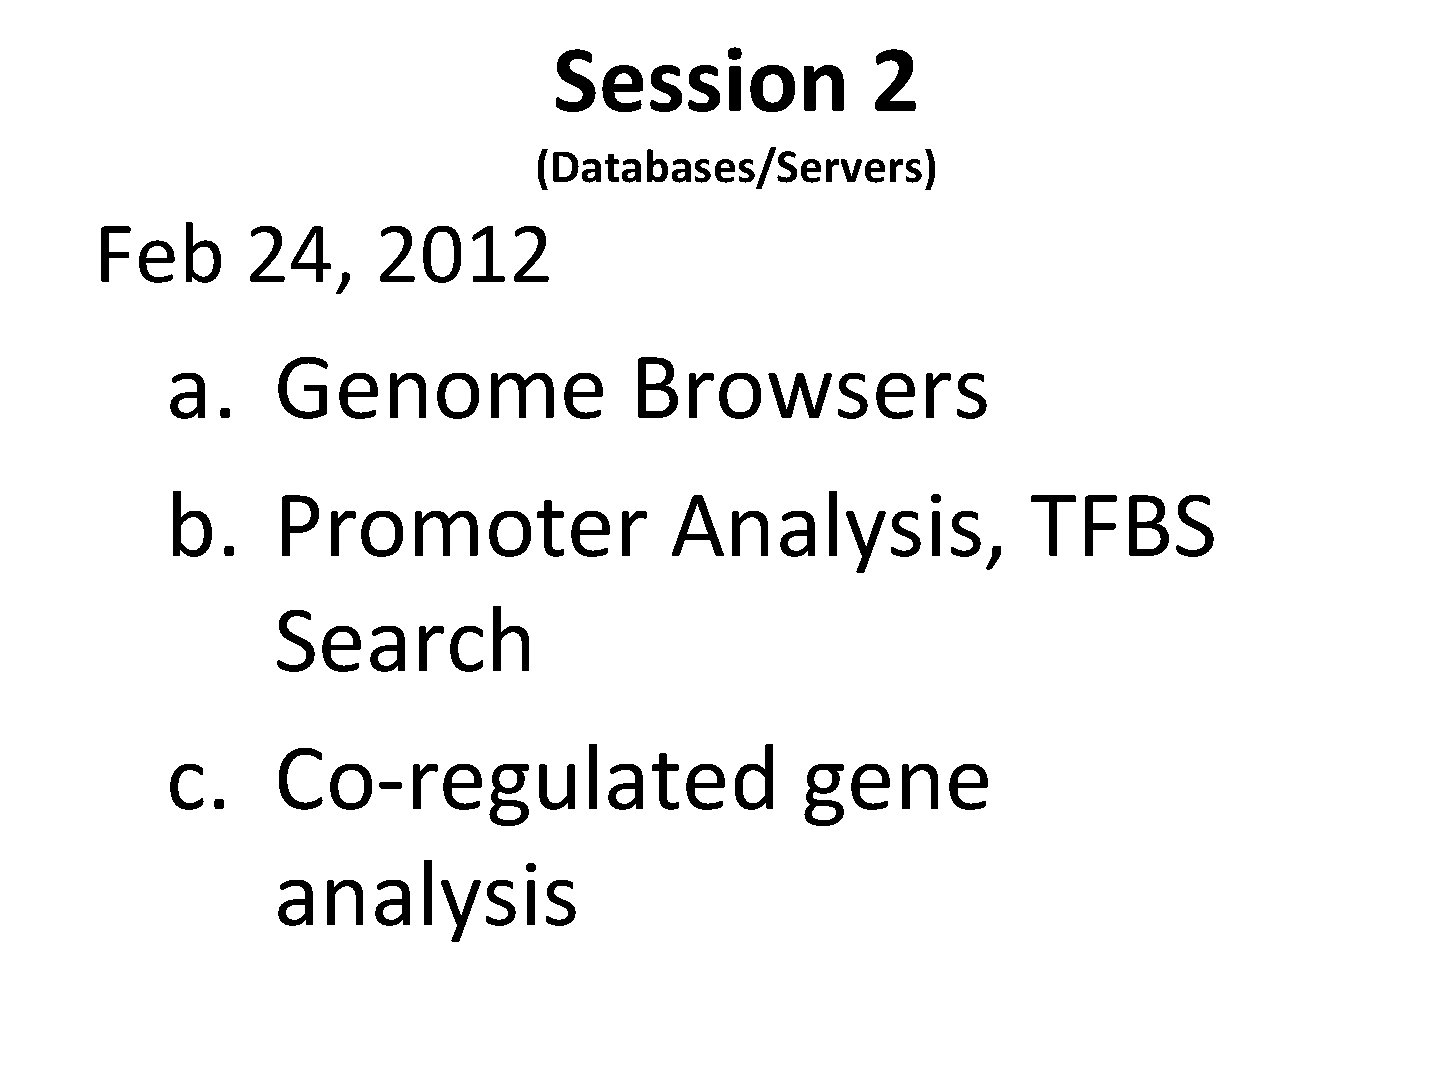 Session 2 (Databases/Servers) Feb 24, 2012 a. Genome Browsers b. Promoter Analysis, TFBS Search